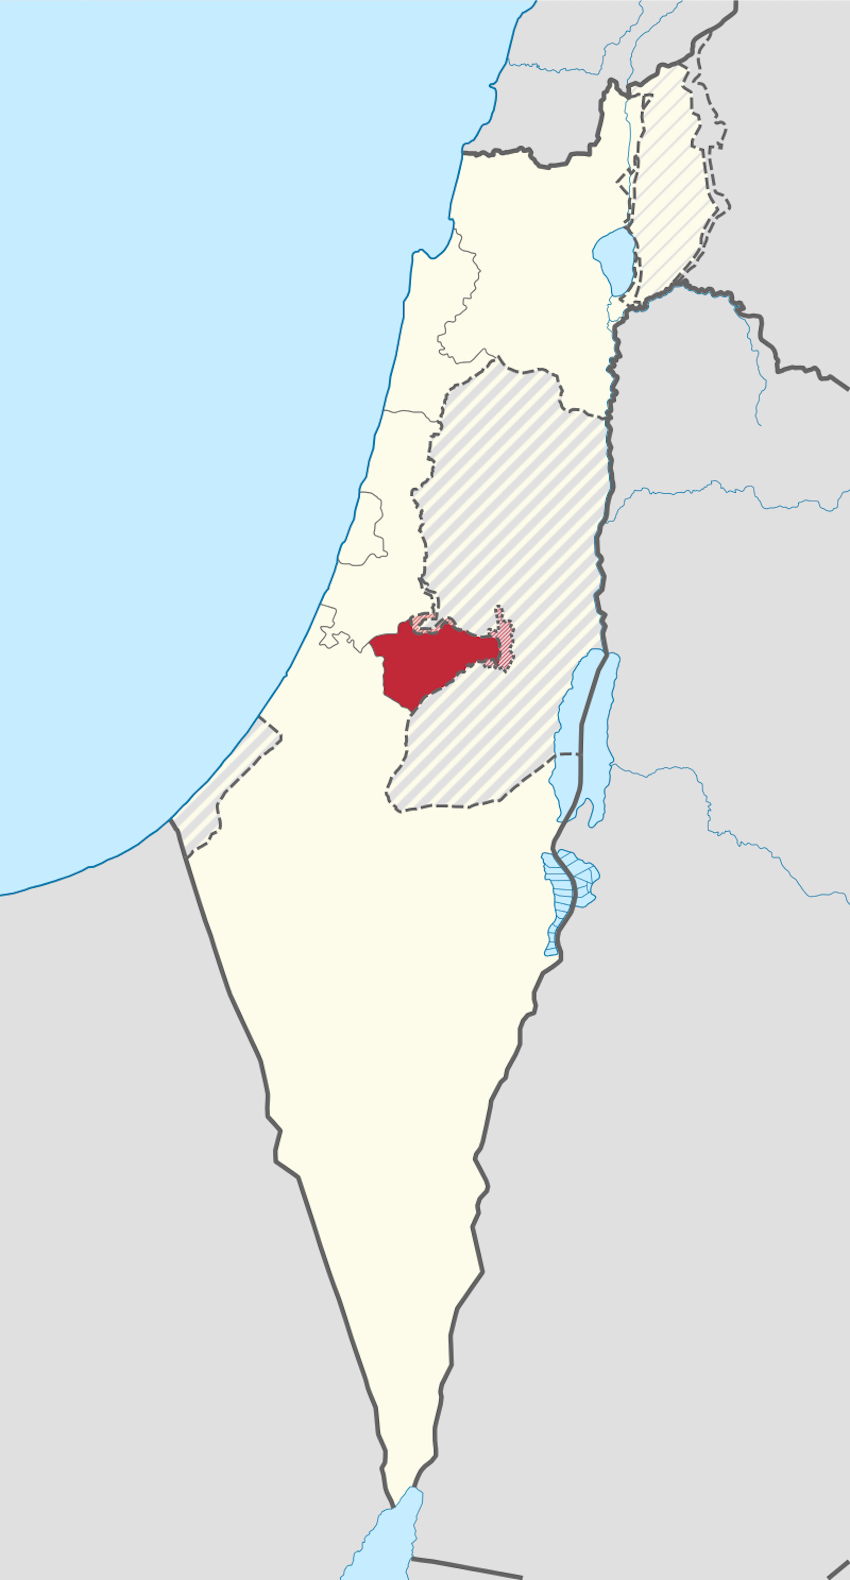 800px-Jerusalem_District_in_Israel_(+disputed_hatched)_(semi-Israel_areas_hatched)